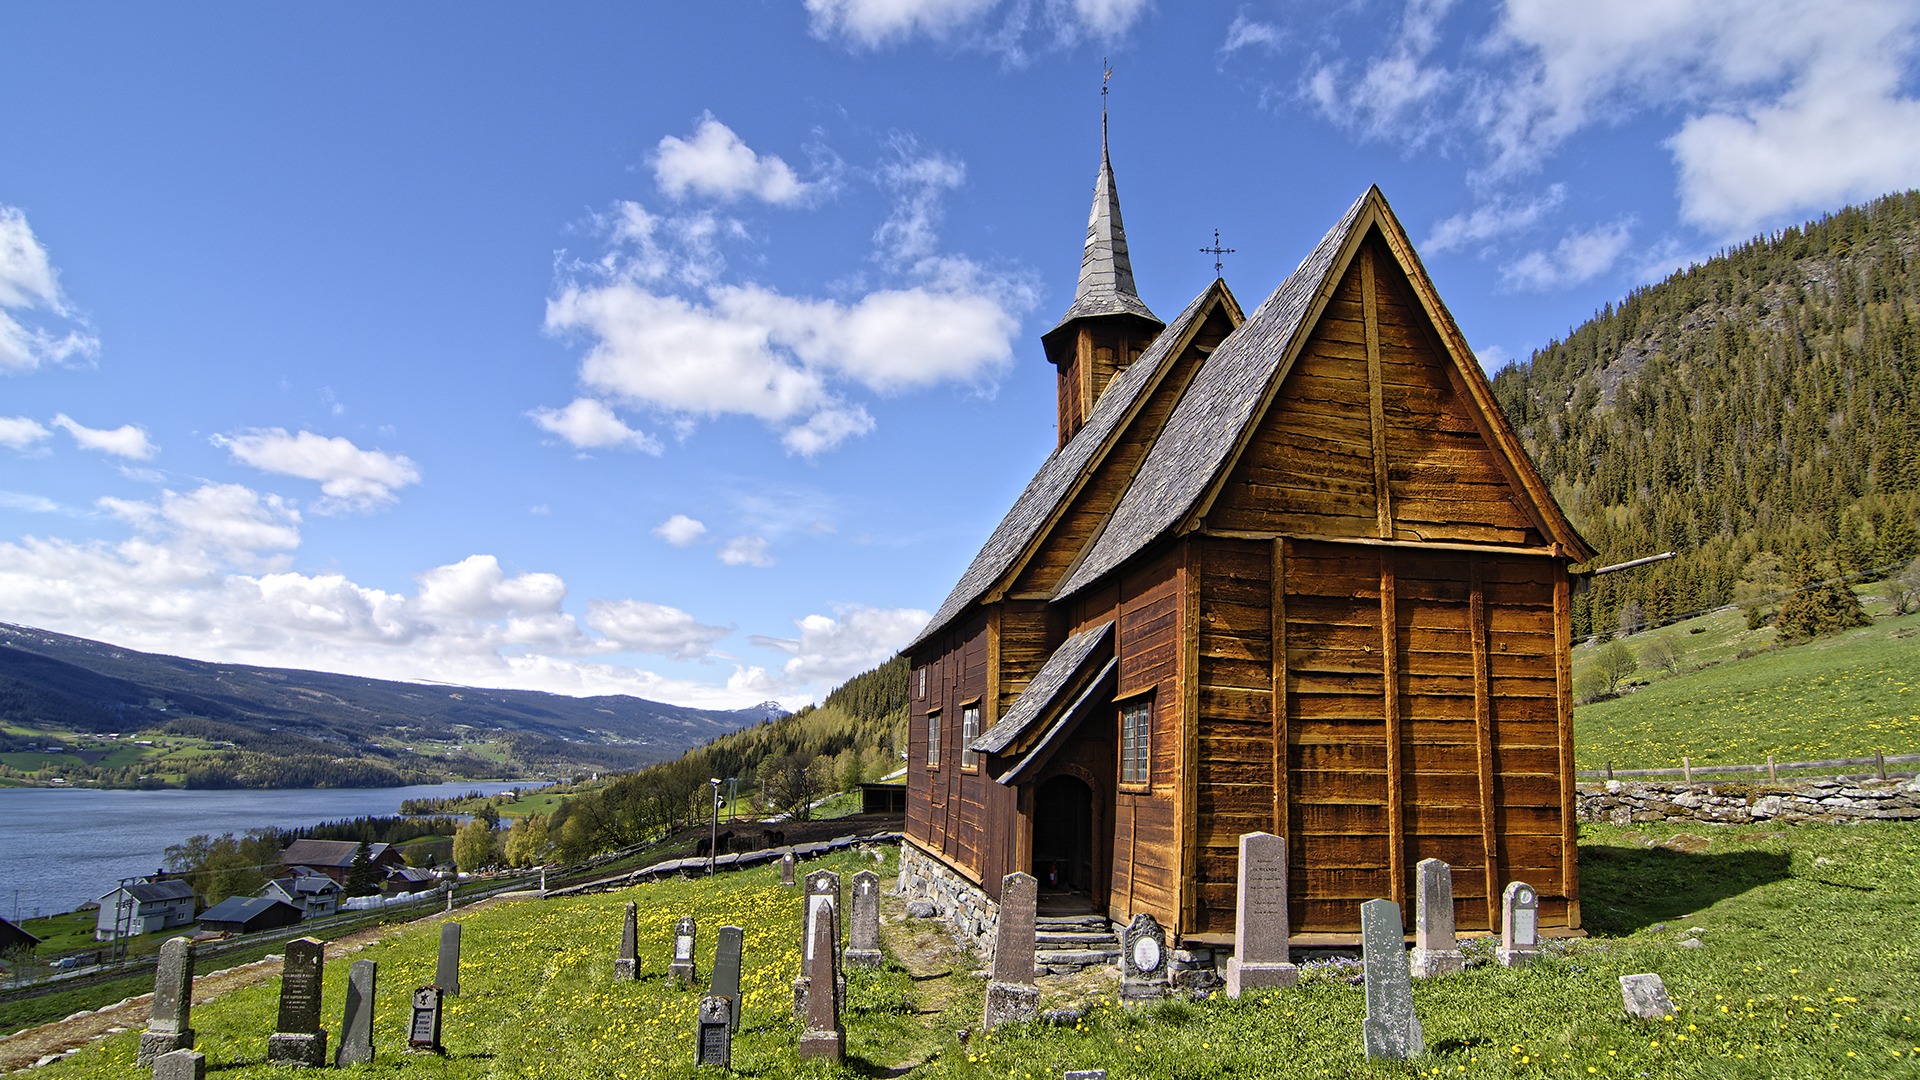 Lomen Stave Church in Valdres is one of the 28 stave churches in Norway.